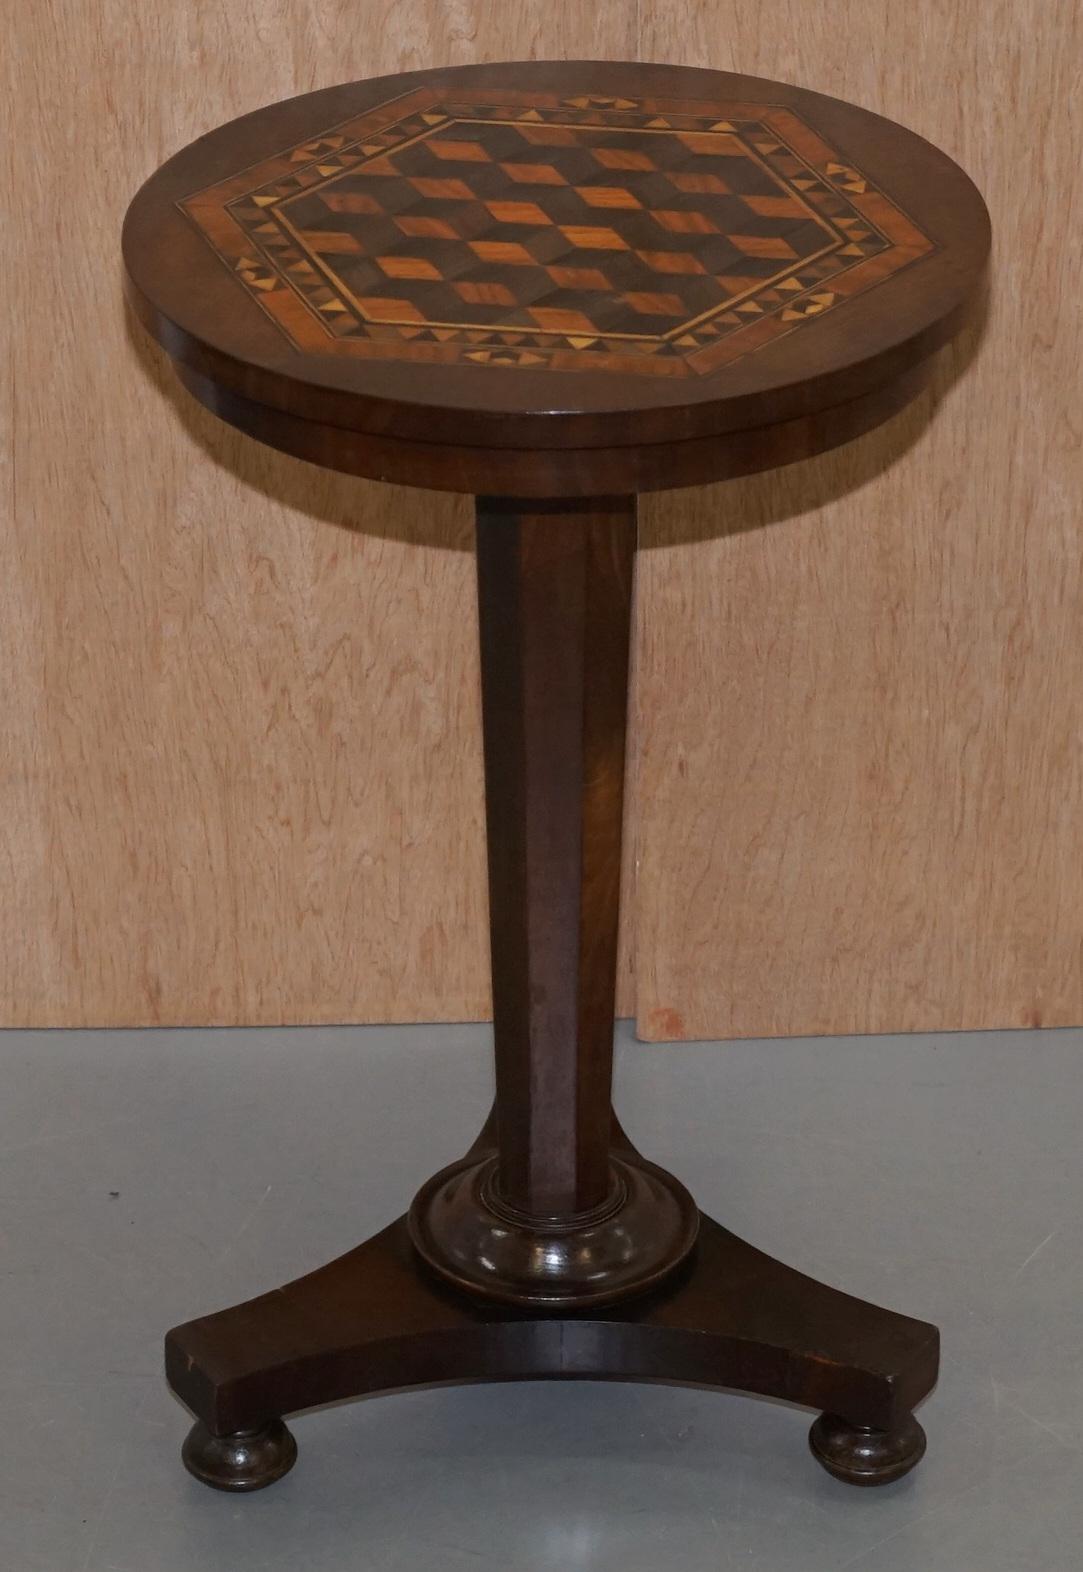 We are delighted to offer for sale this sublime Victorian mahogany occasional table with exquisite geometric parquetry inlaid specimen wood top

A very good looking and well made piece, the table top is like a piece of art, its so intelligently